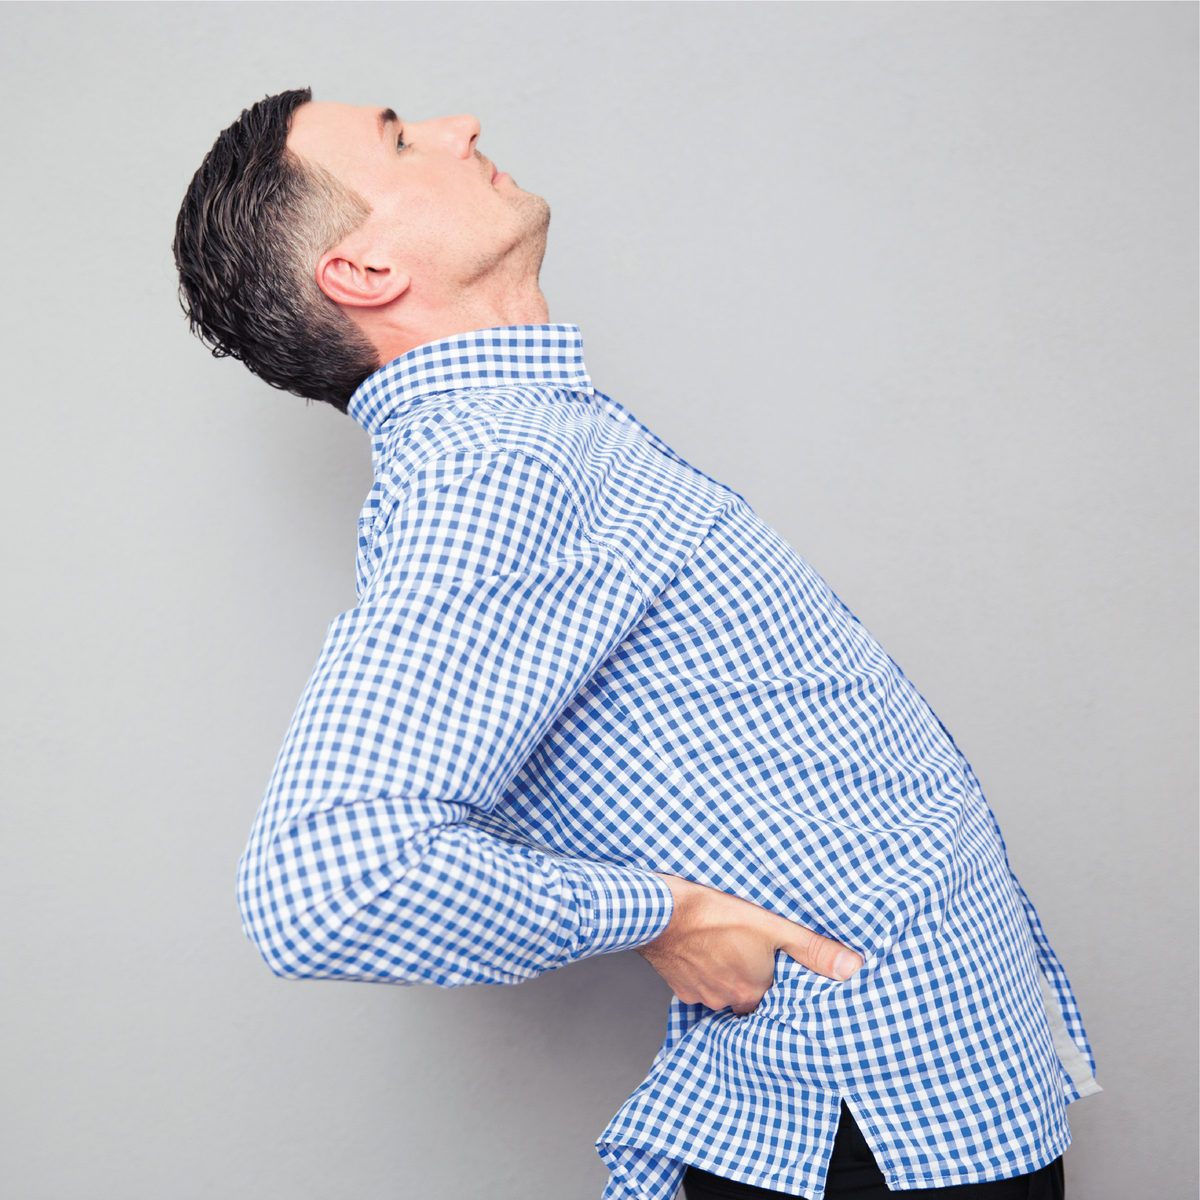 A man holding his lower back in pain